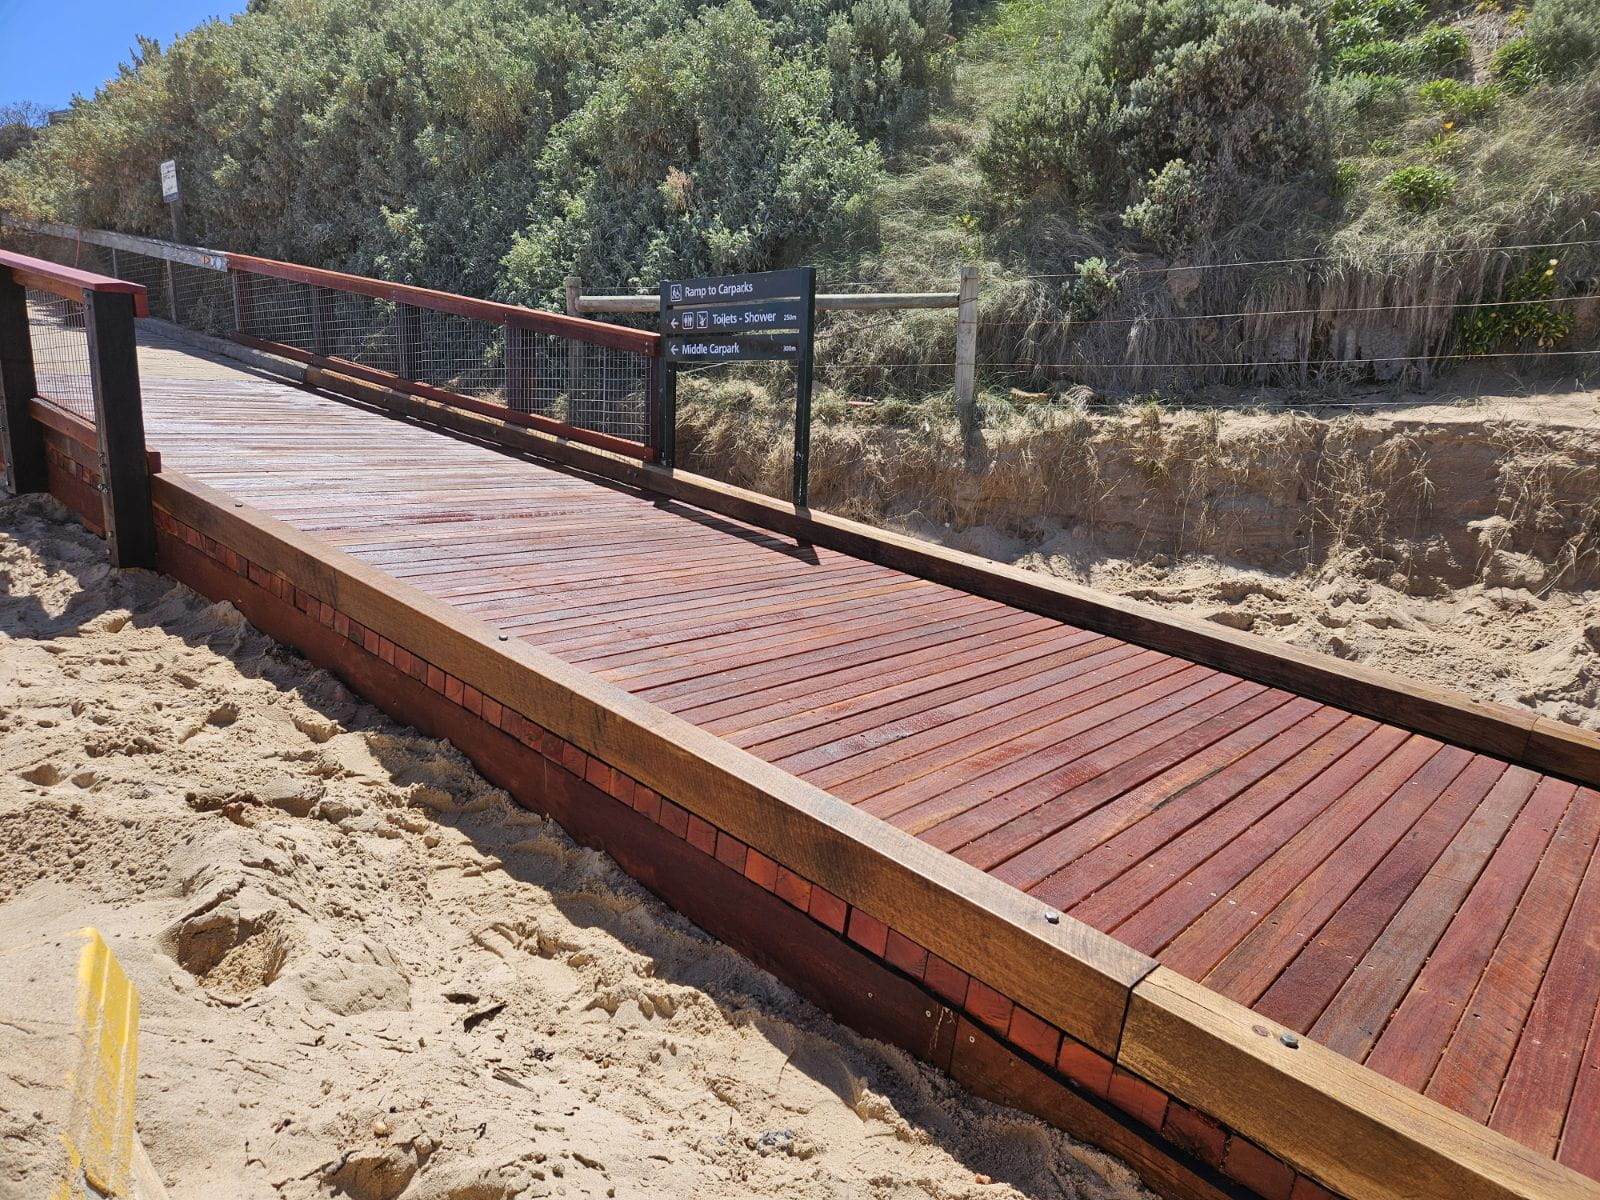 Photo of the new timber ramp at Portsea Ocean Beach.